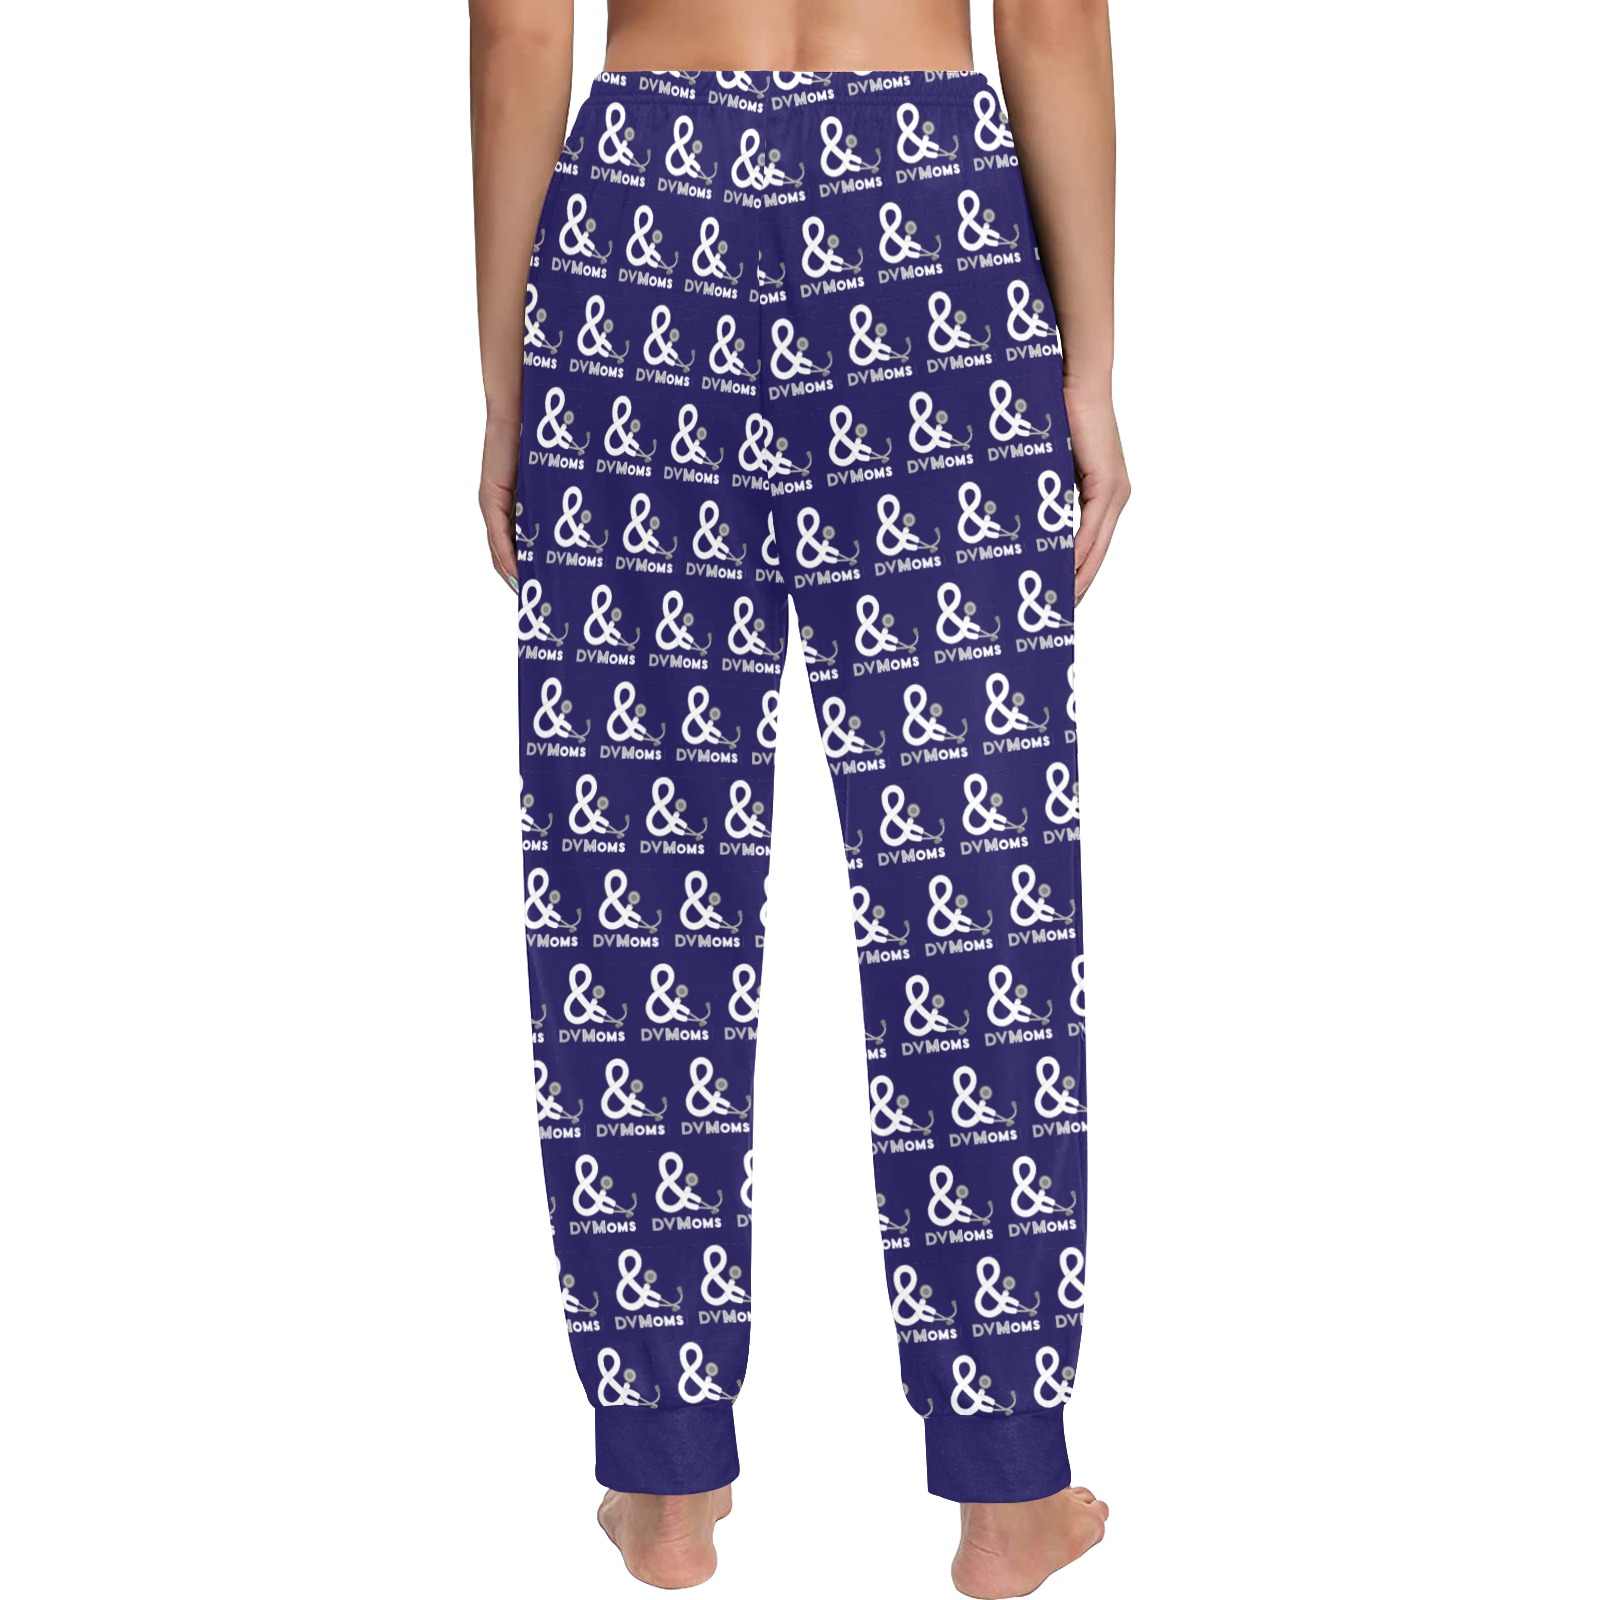 Navy pants all over logo Women's All Over Print Pajama Trousers